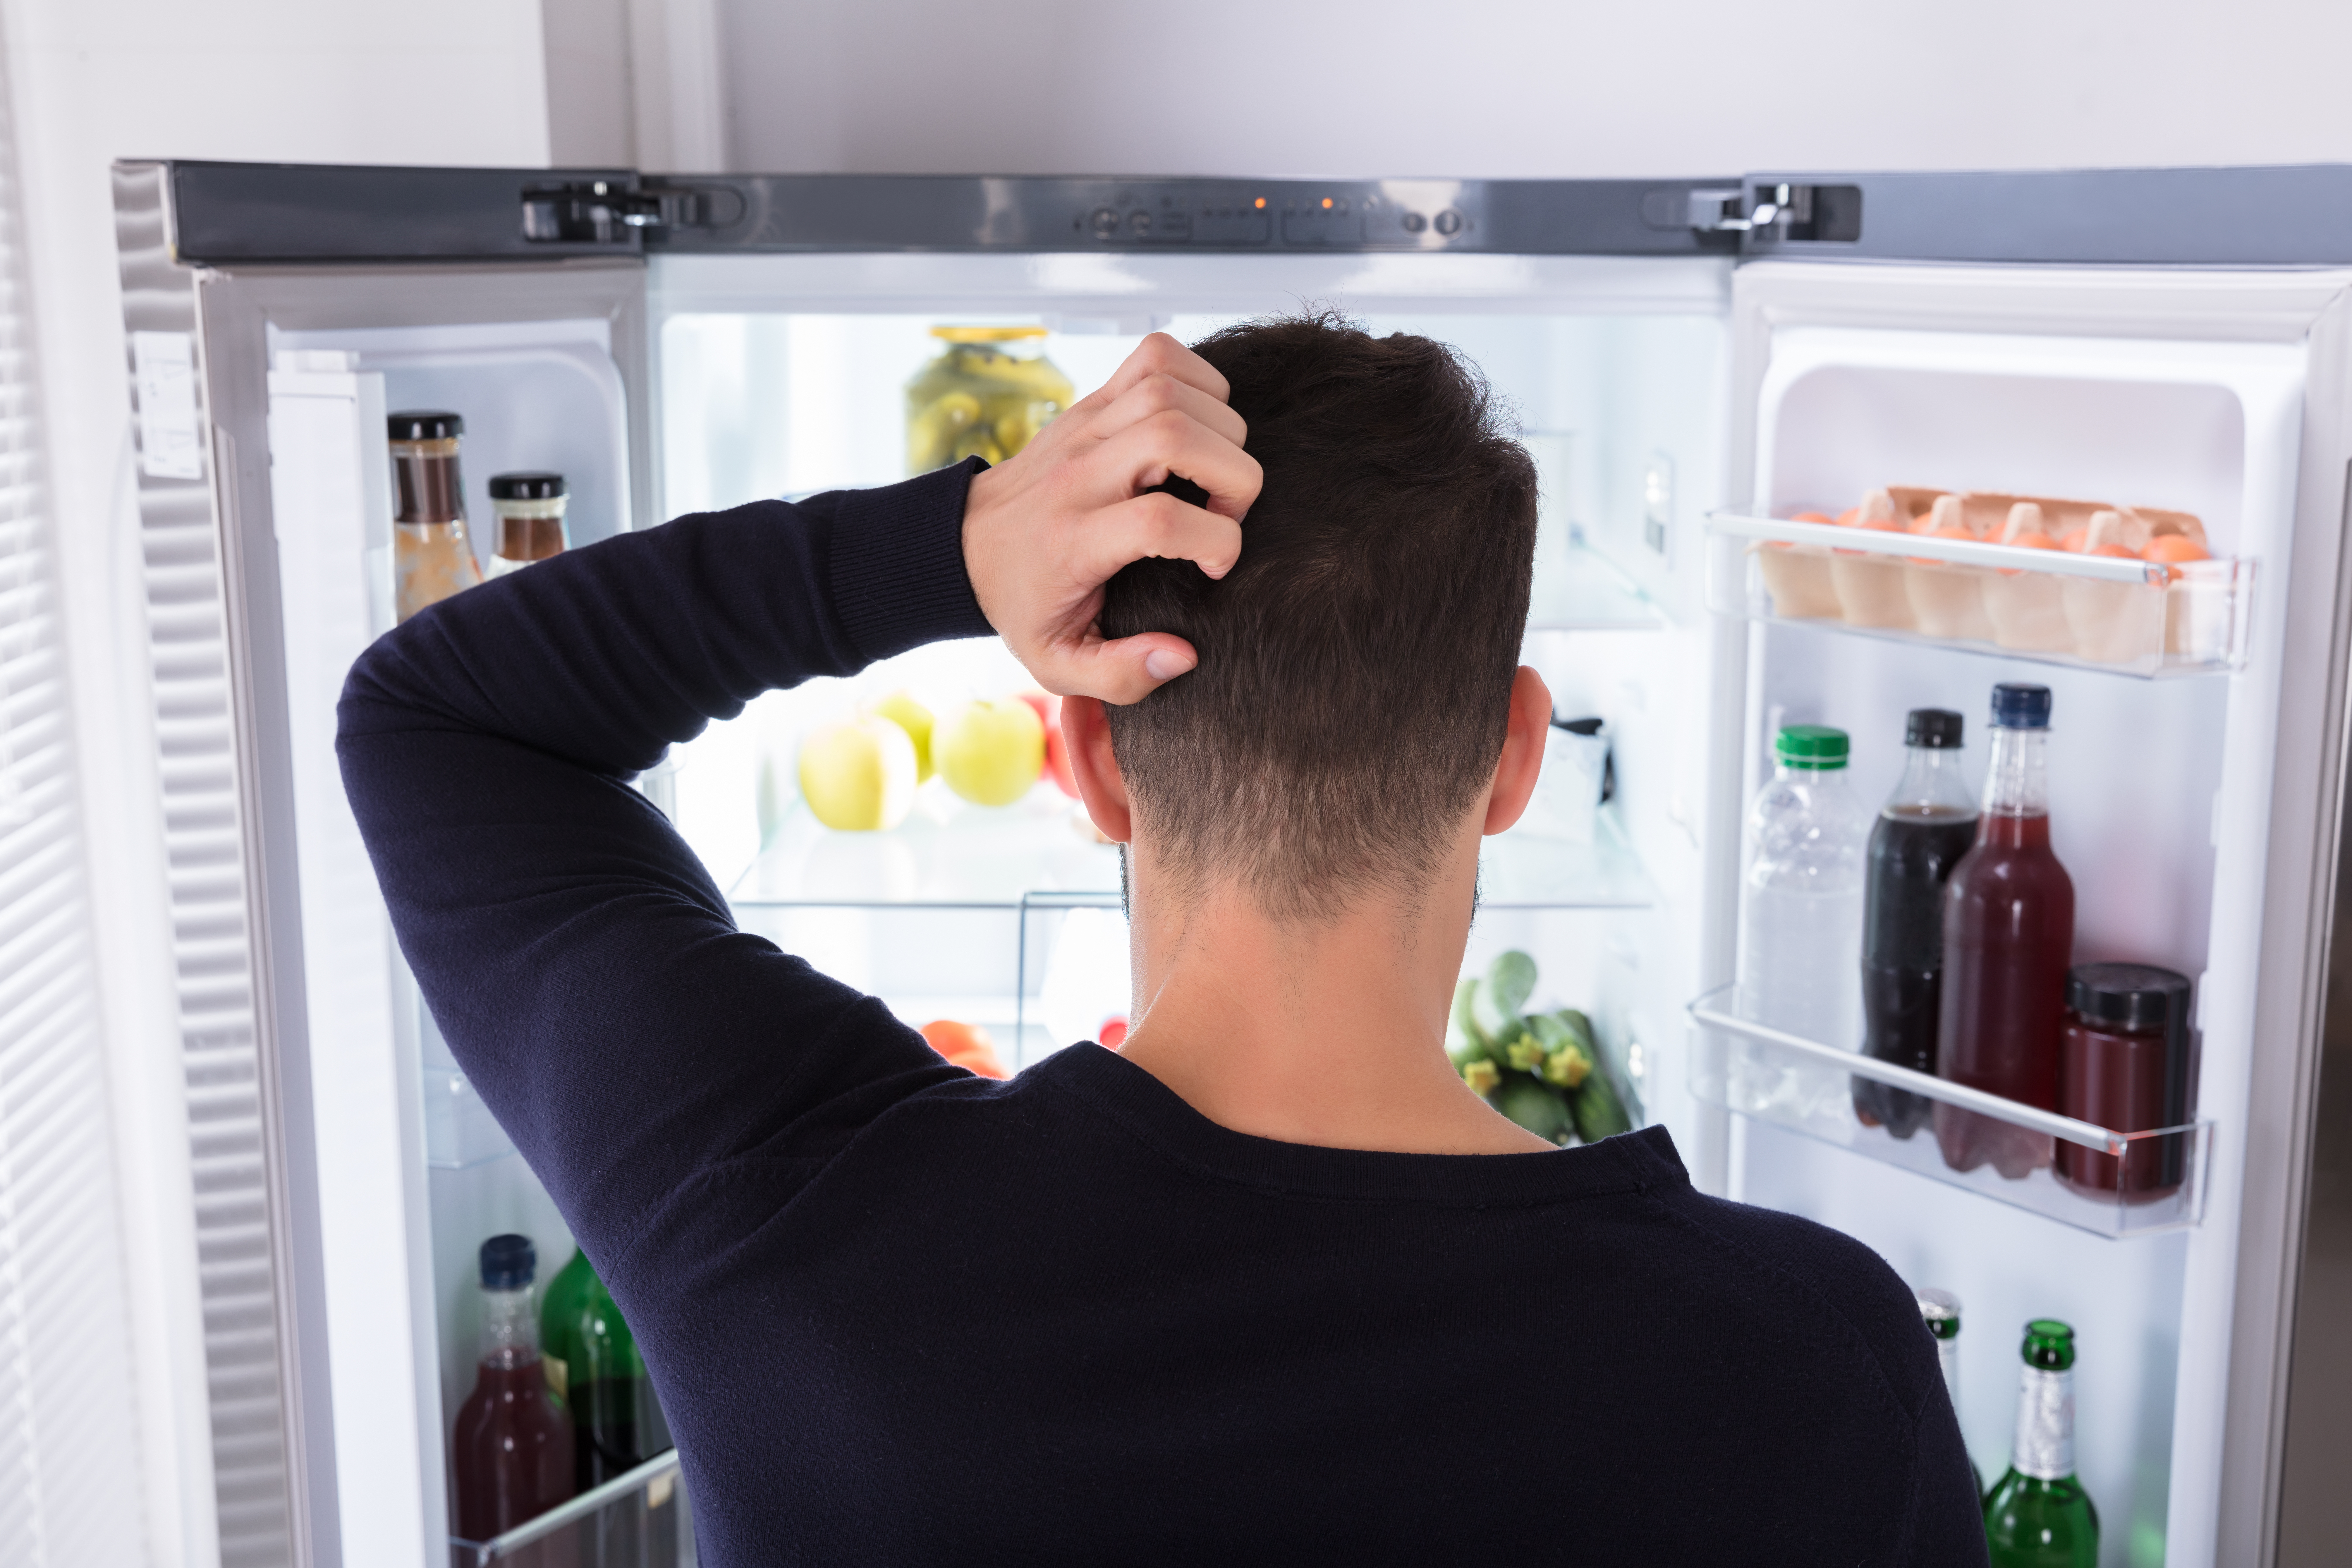 Rear View Of A Confused Young Man Looking At Food In Refrigerator. | Source: Shutterstock